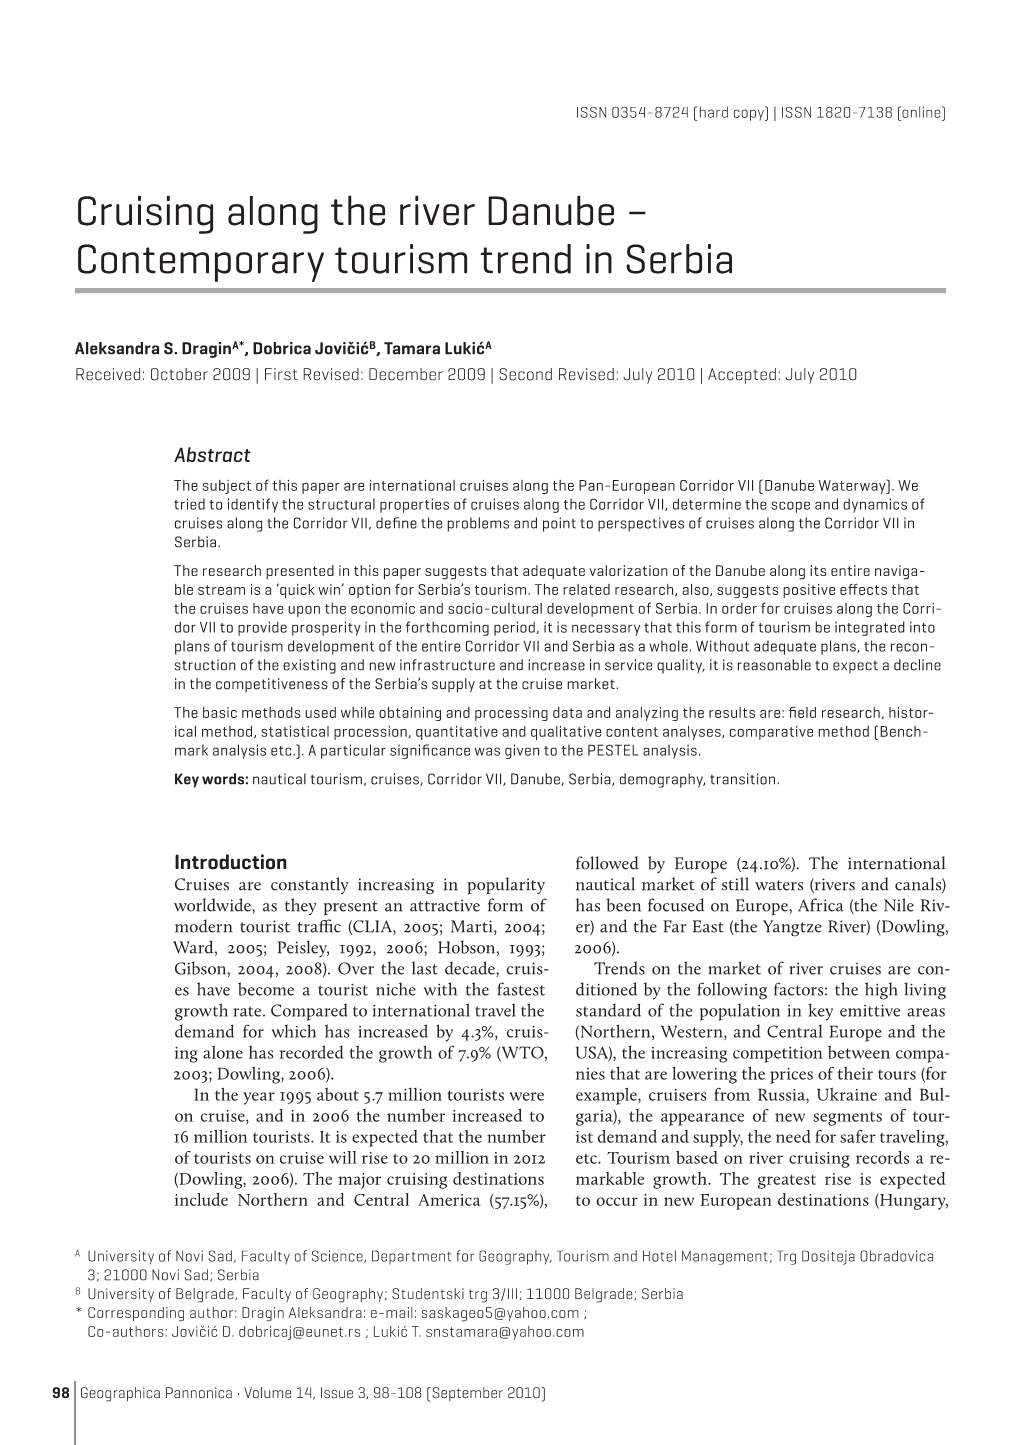 Cruising Along the River Danube – Contemporary Tourism Trend in Serbia